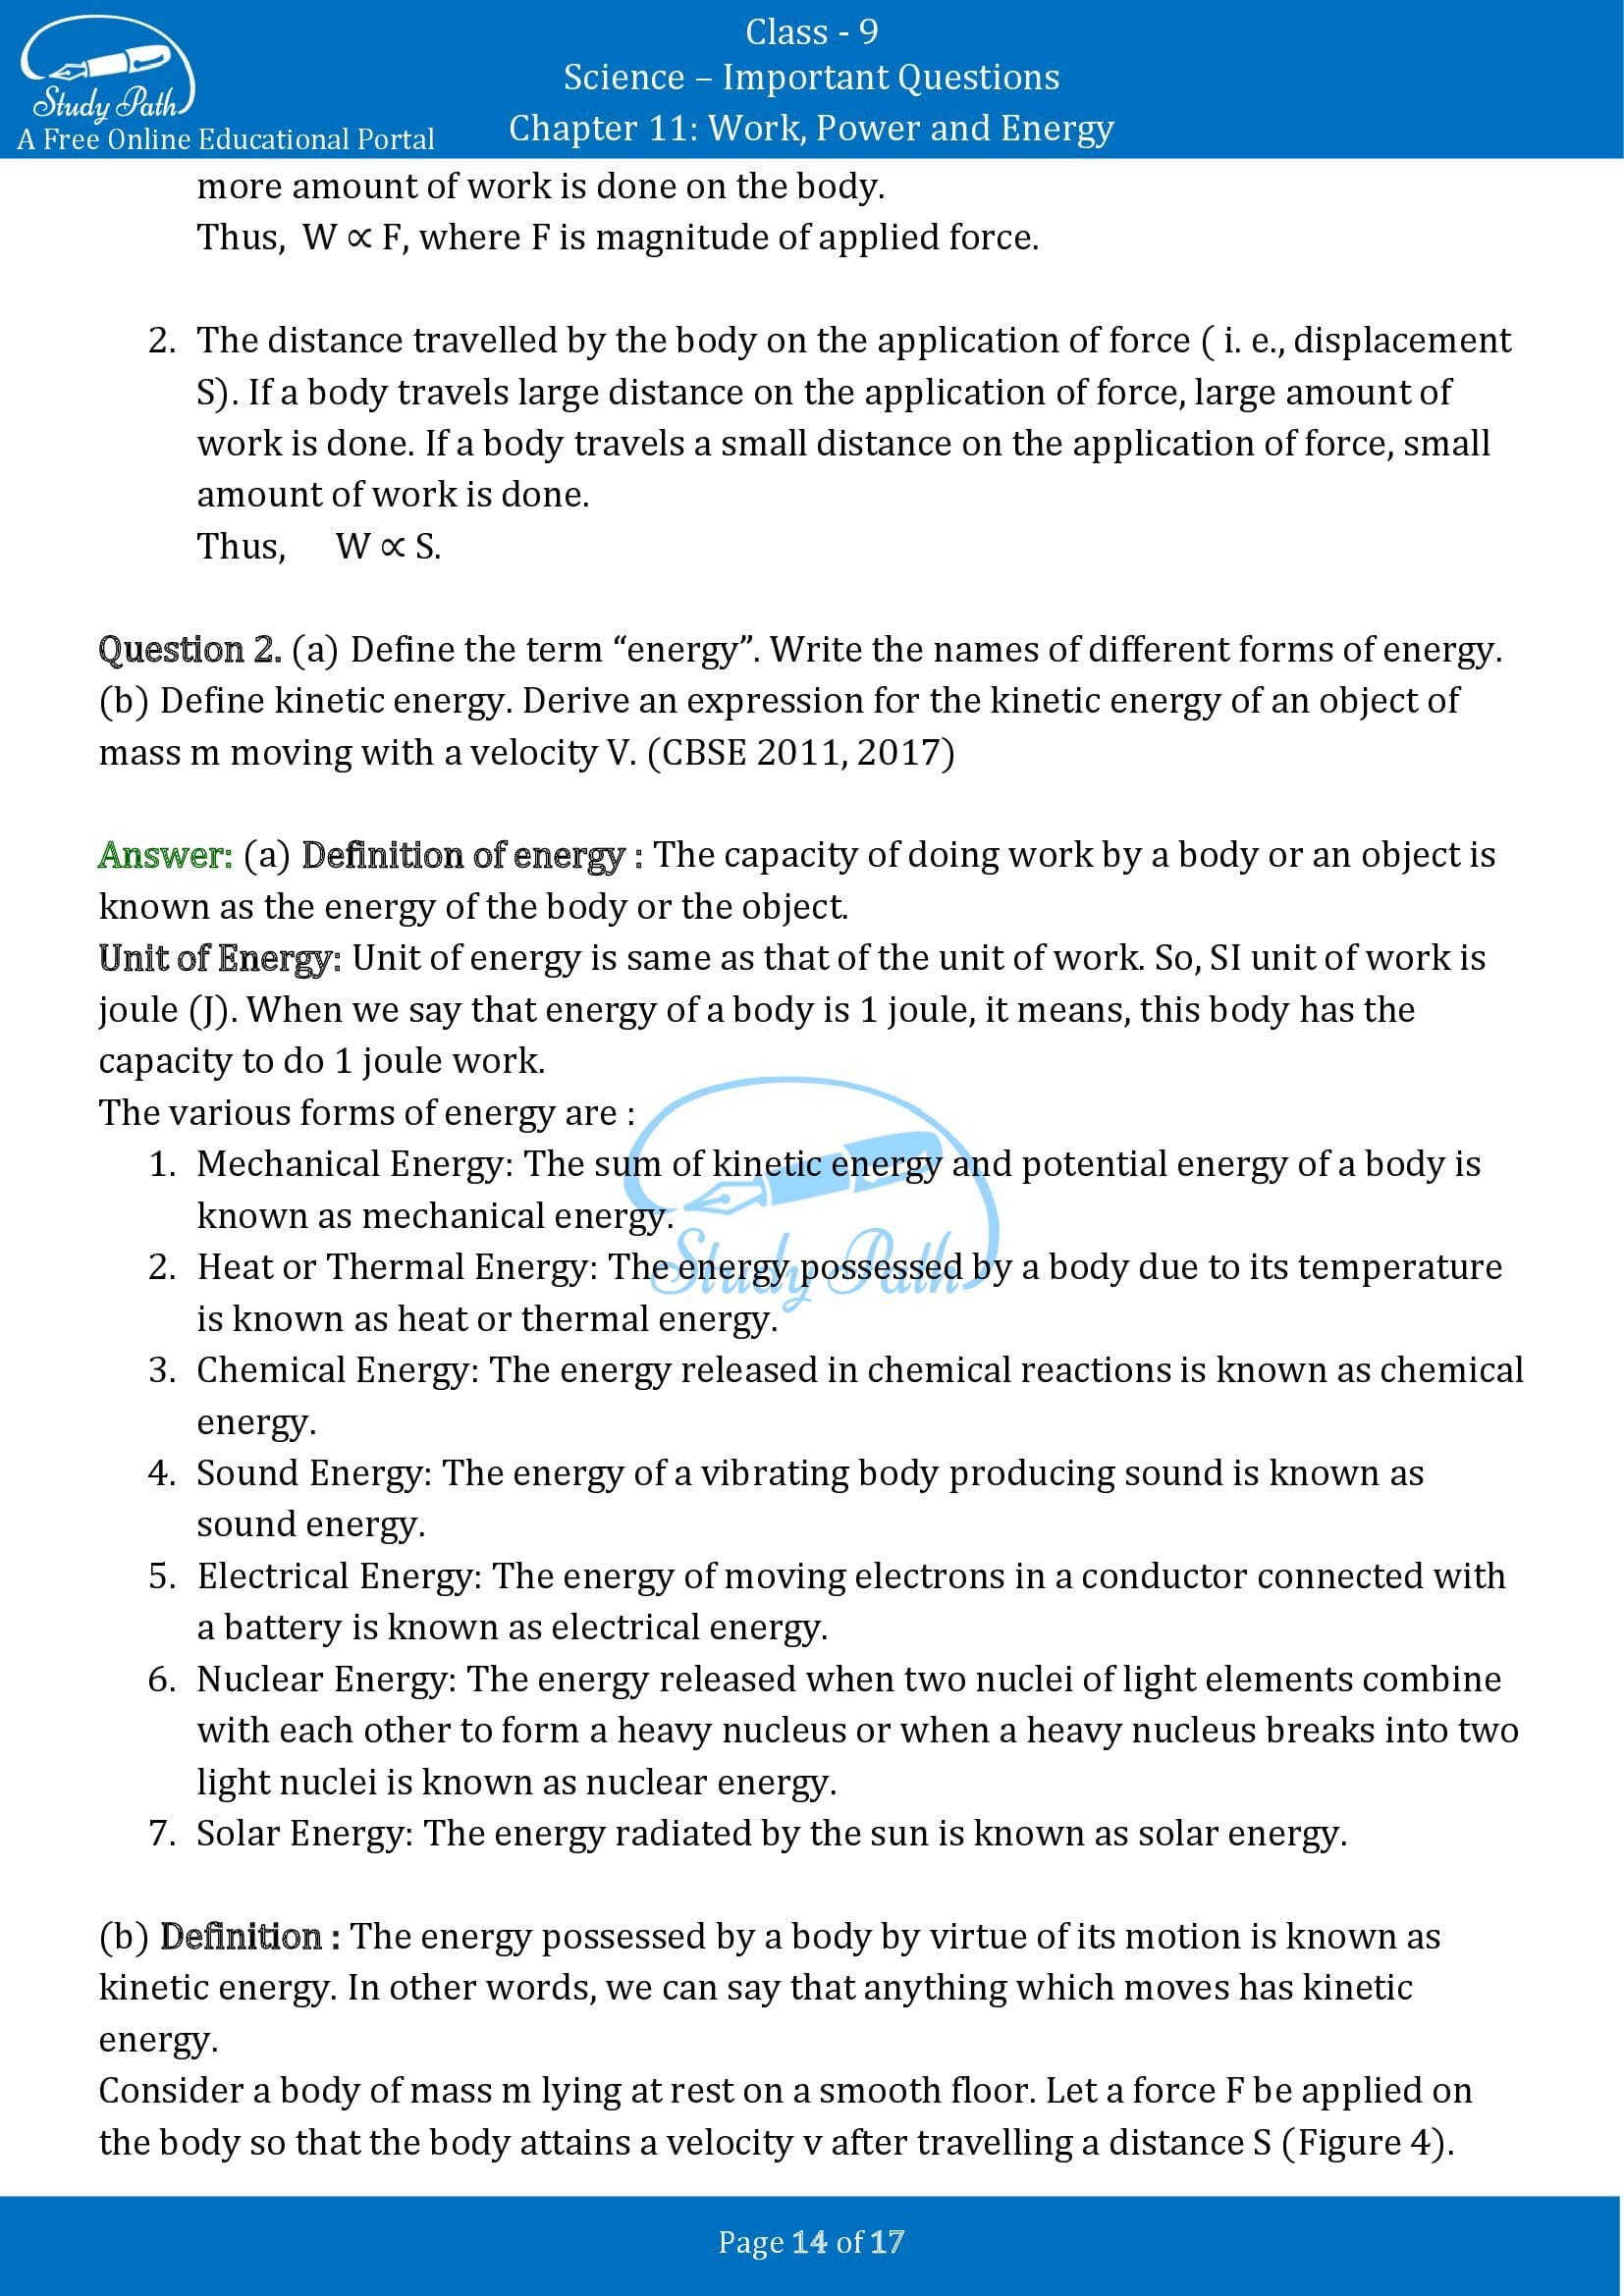 Important Questions for Class 9 Science Chapter 11 Work Power and Energy 00014